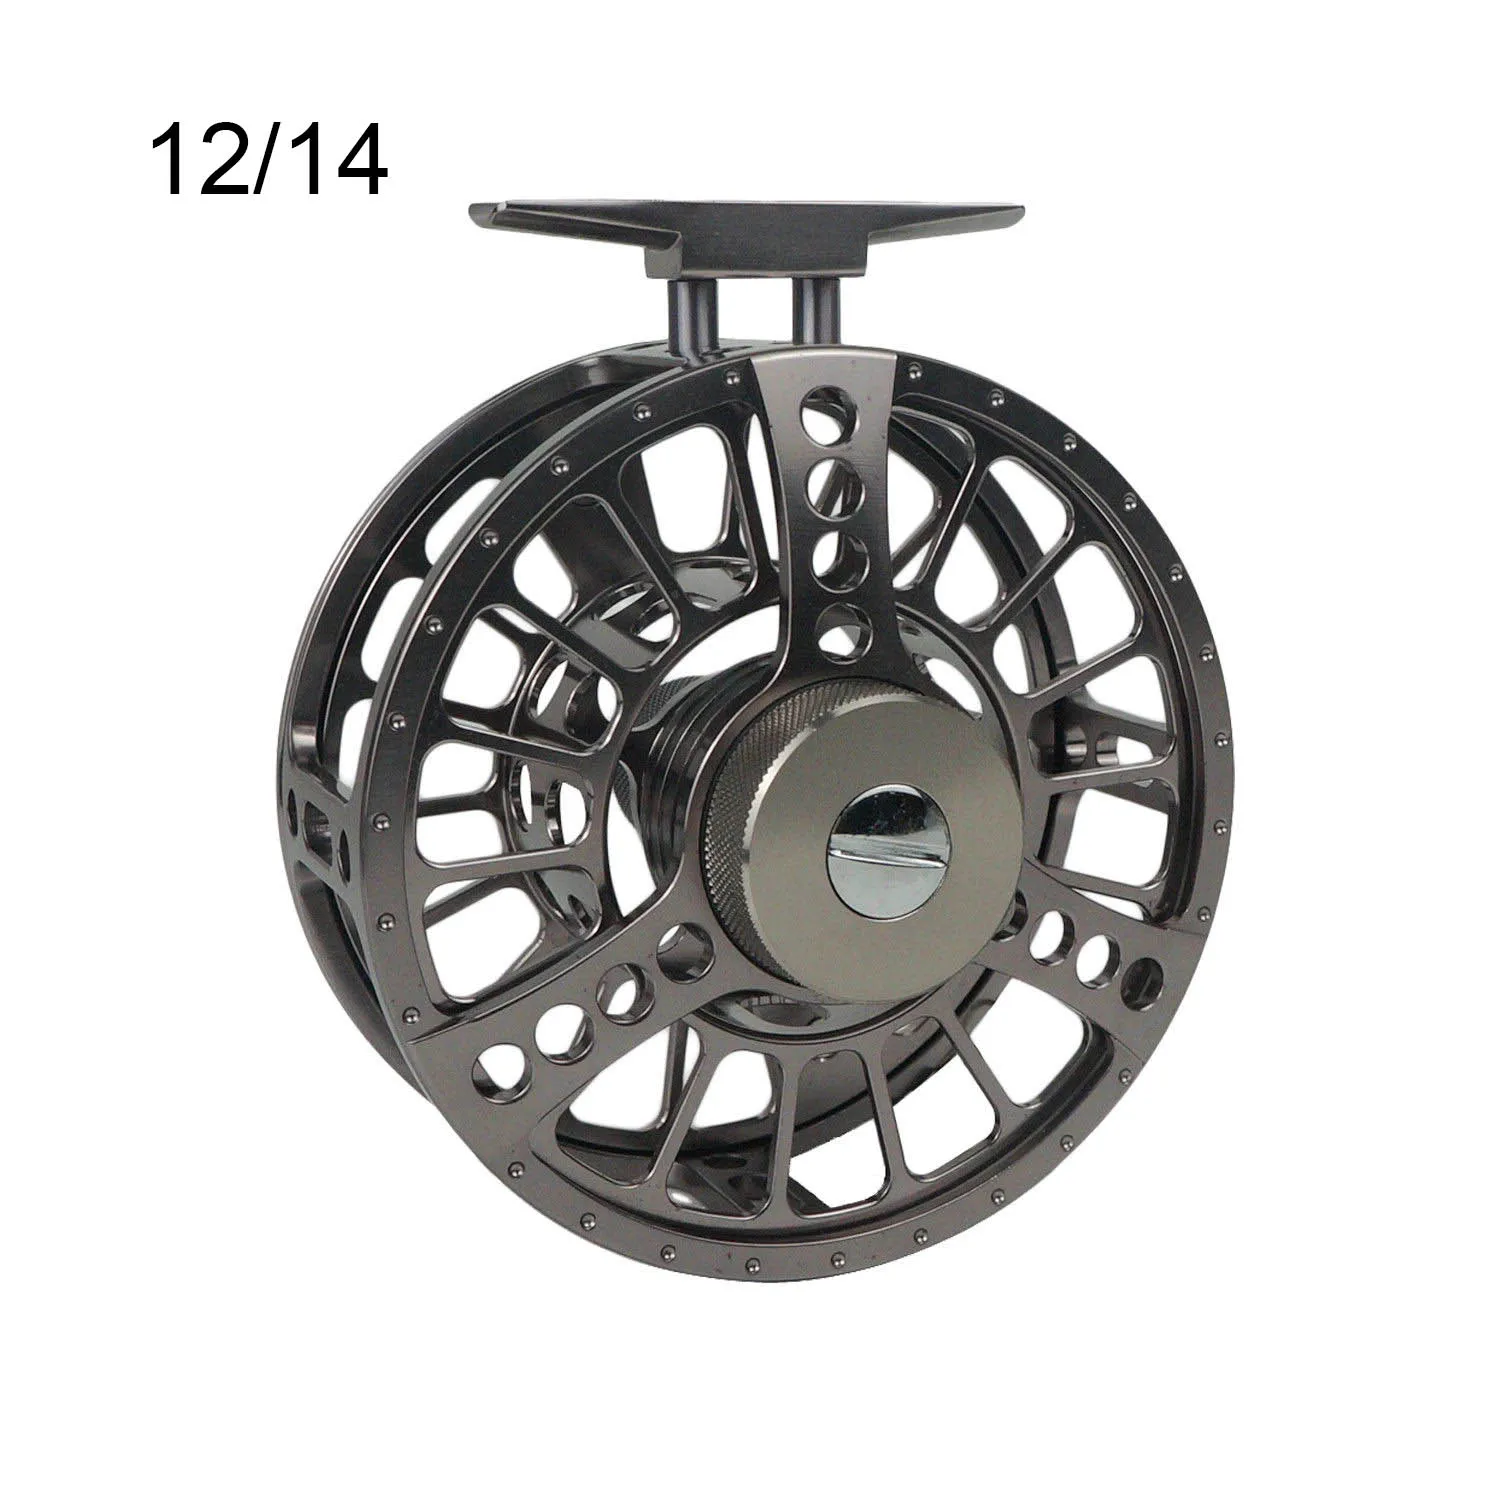 Aventik Quality Salmon Saltwater Wheel With Sealed Waterproof Multi Group  Carbon Drag System Fly Fishing Reel - Fishing Reels - AliExpress